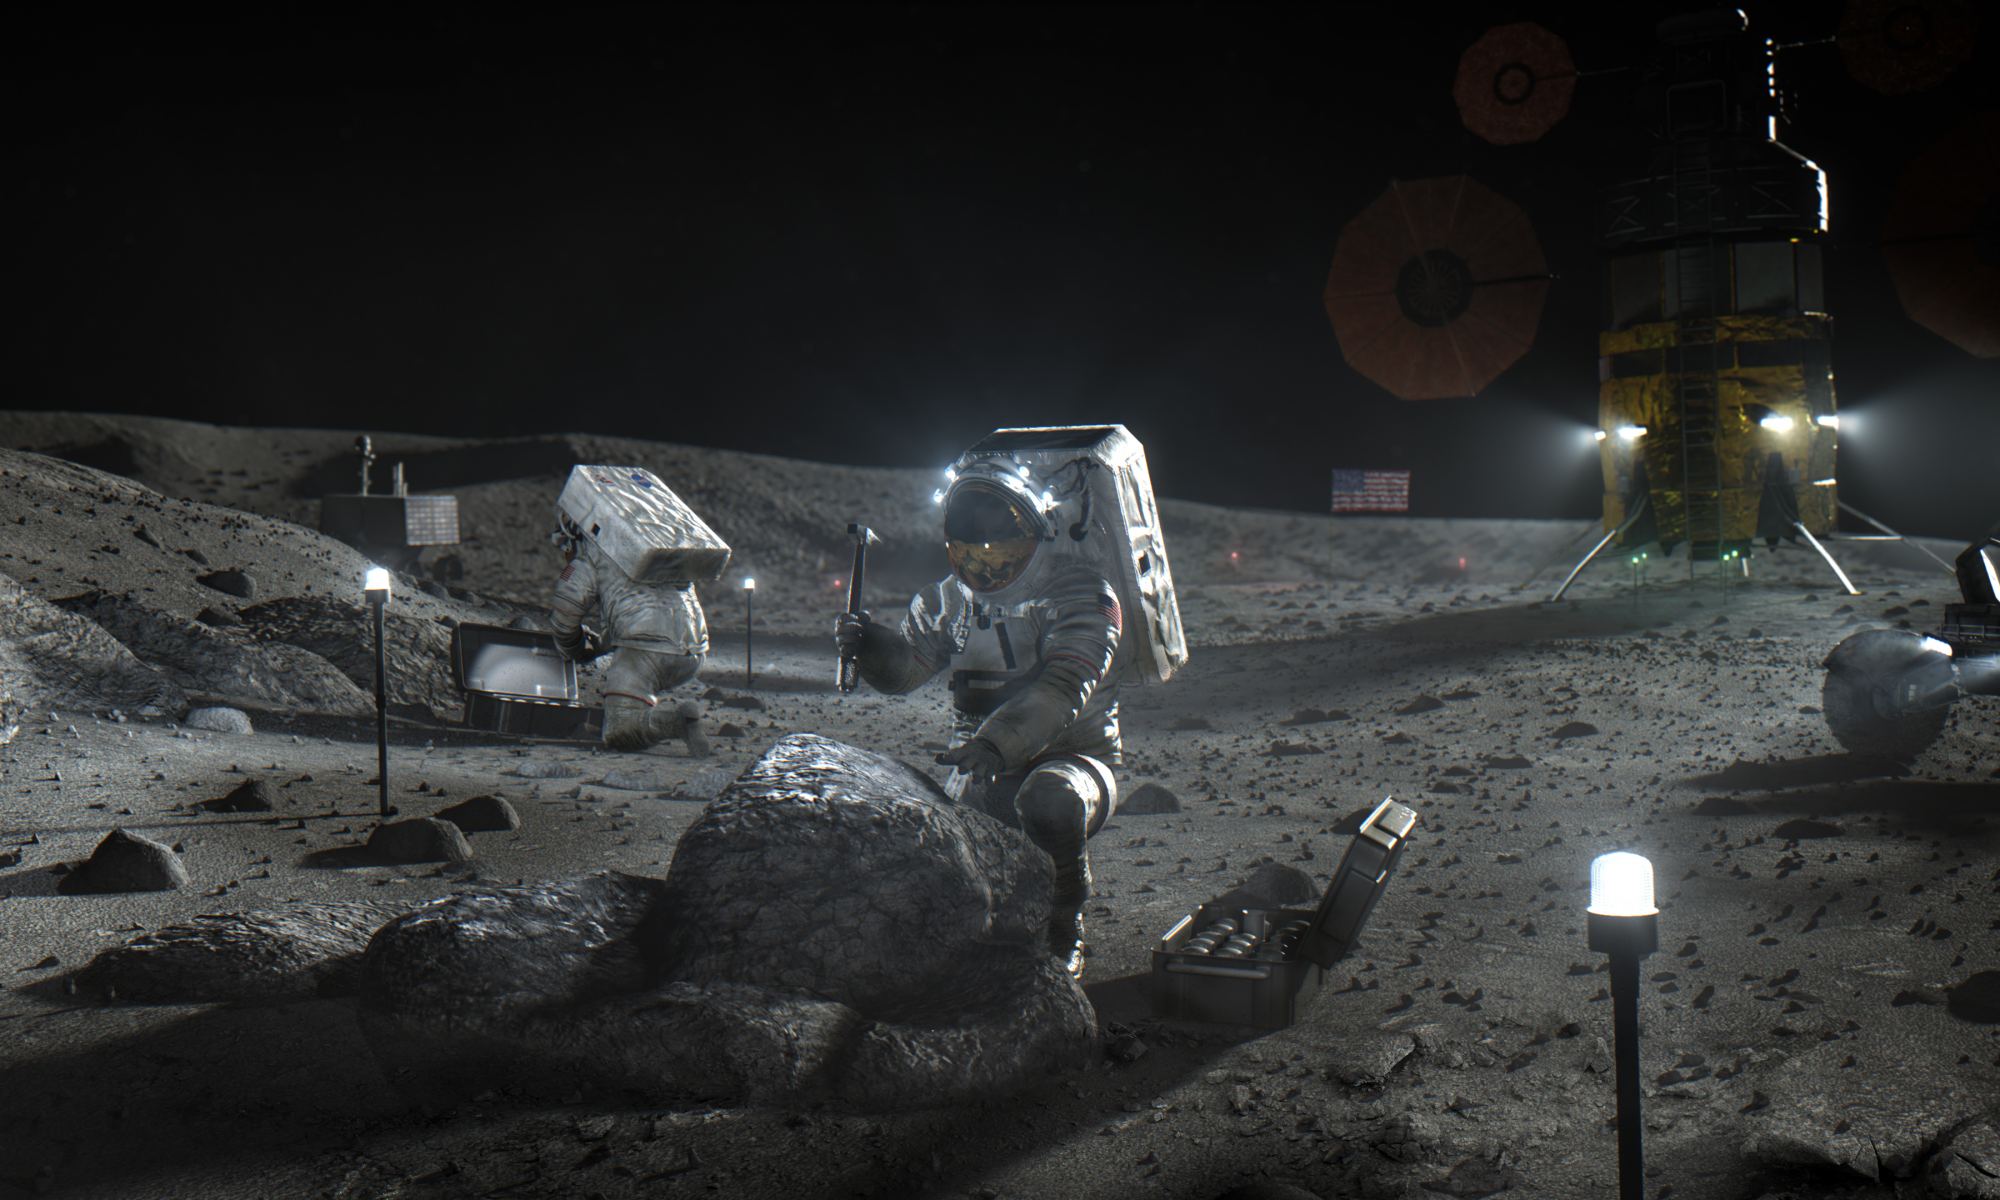 Artist's impression of astronauts on the lunar surface, as part of the Artemis Program. How will they store power on the Moon? 3D printed batteries could help. Credit: NASA